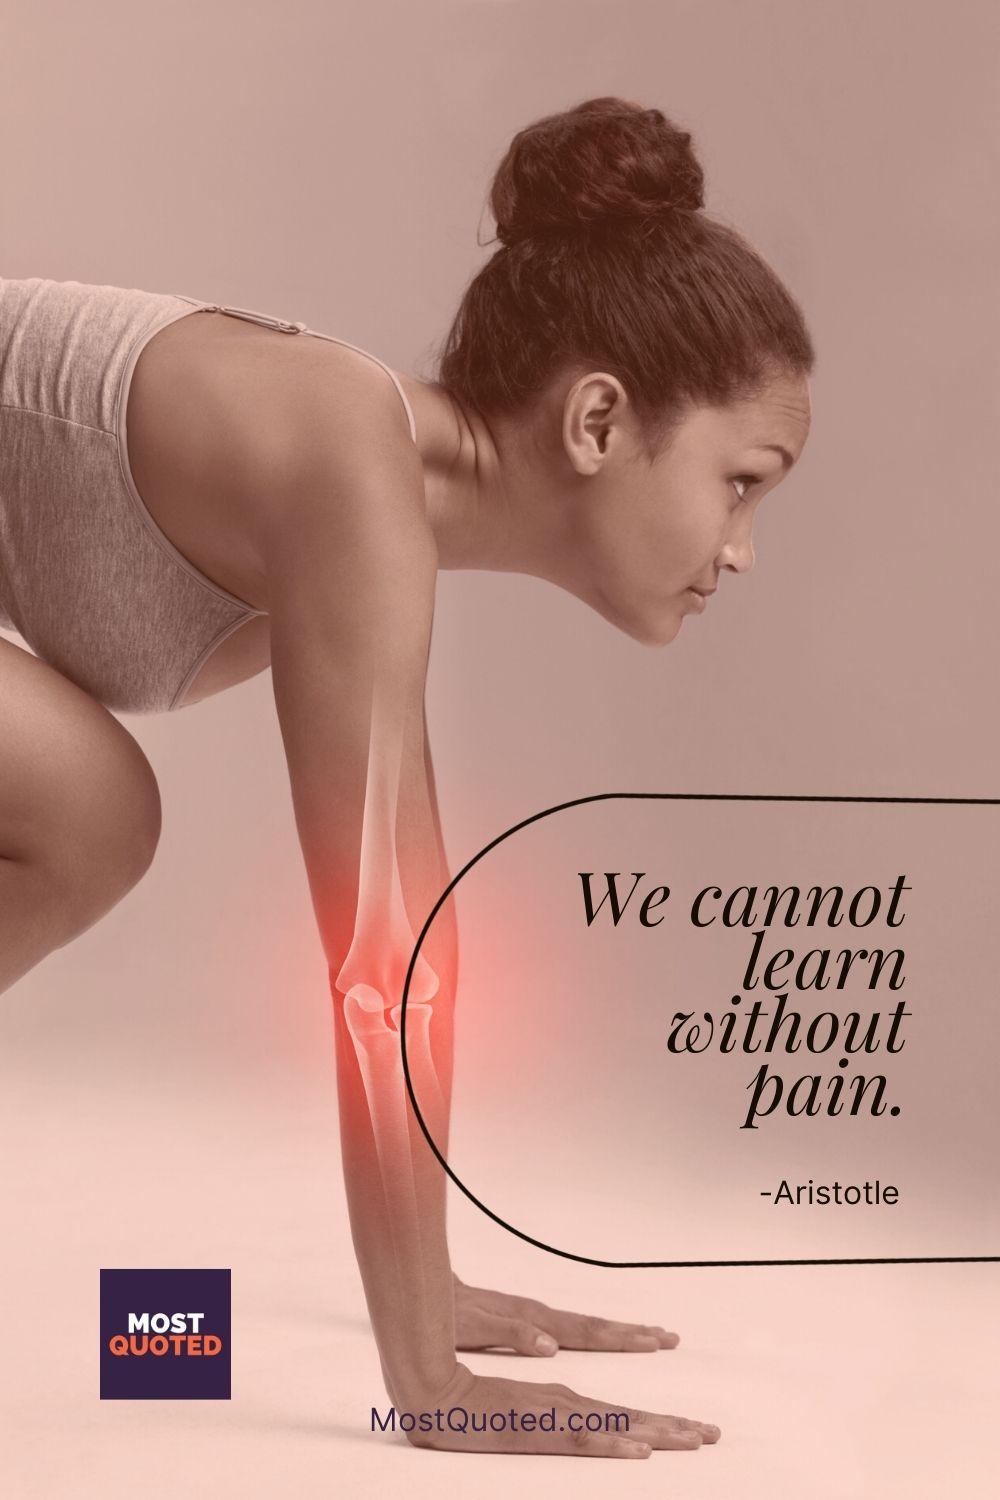 We cannot learn without pain. - Aristotle